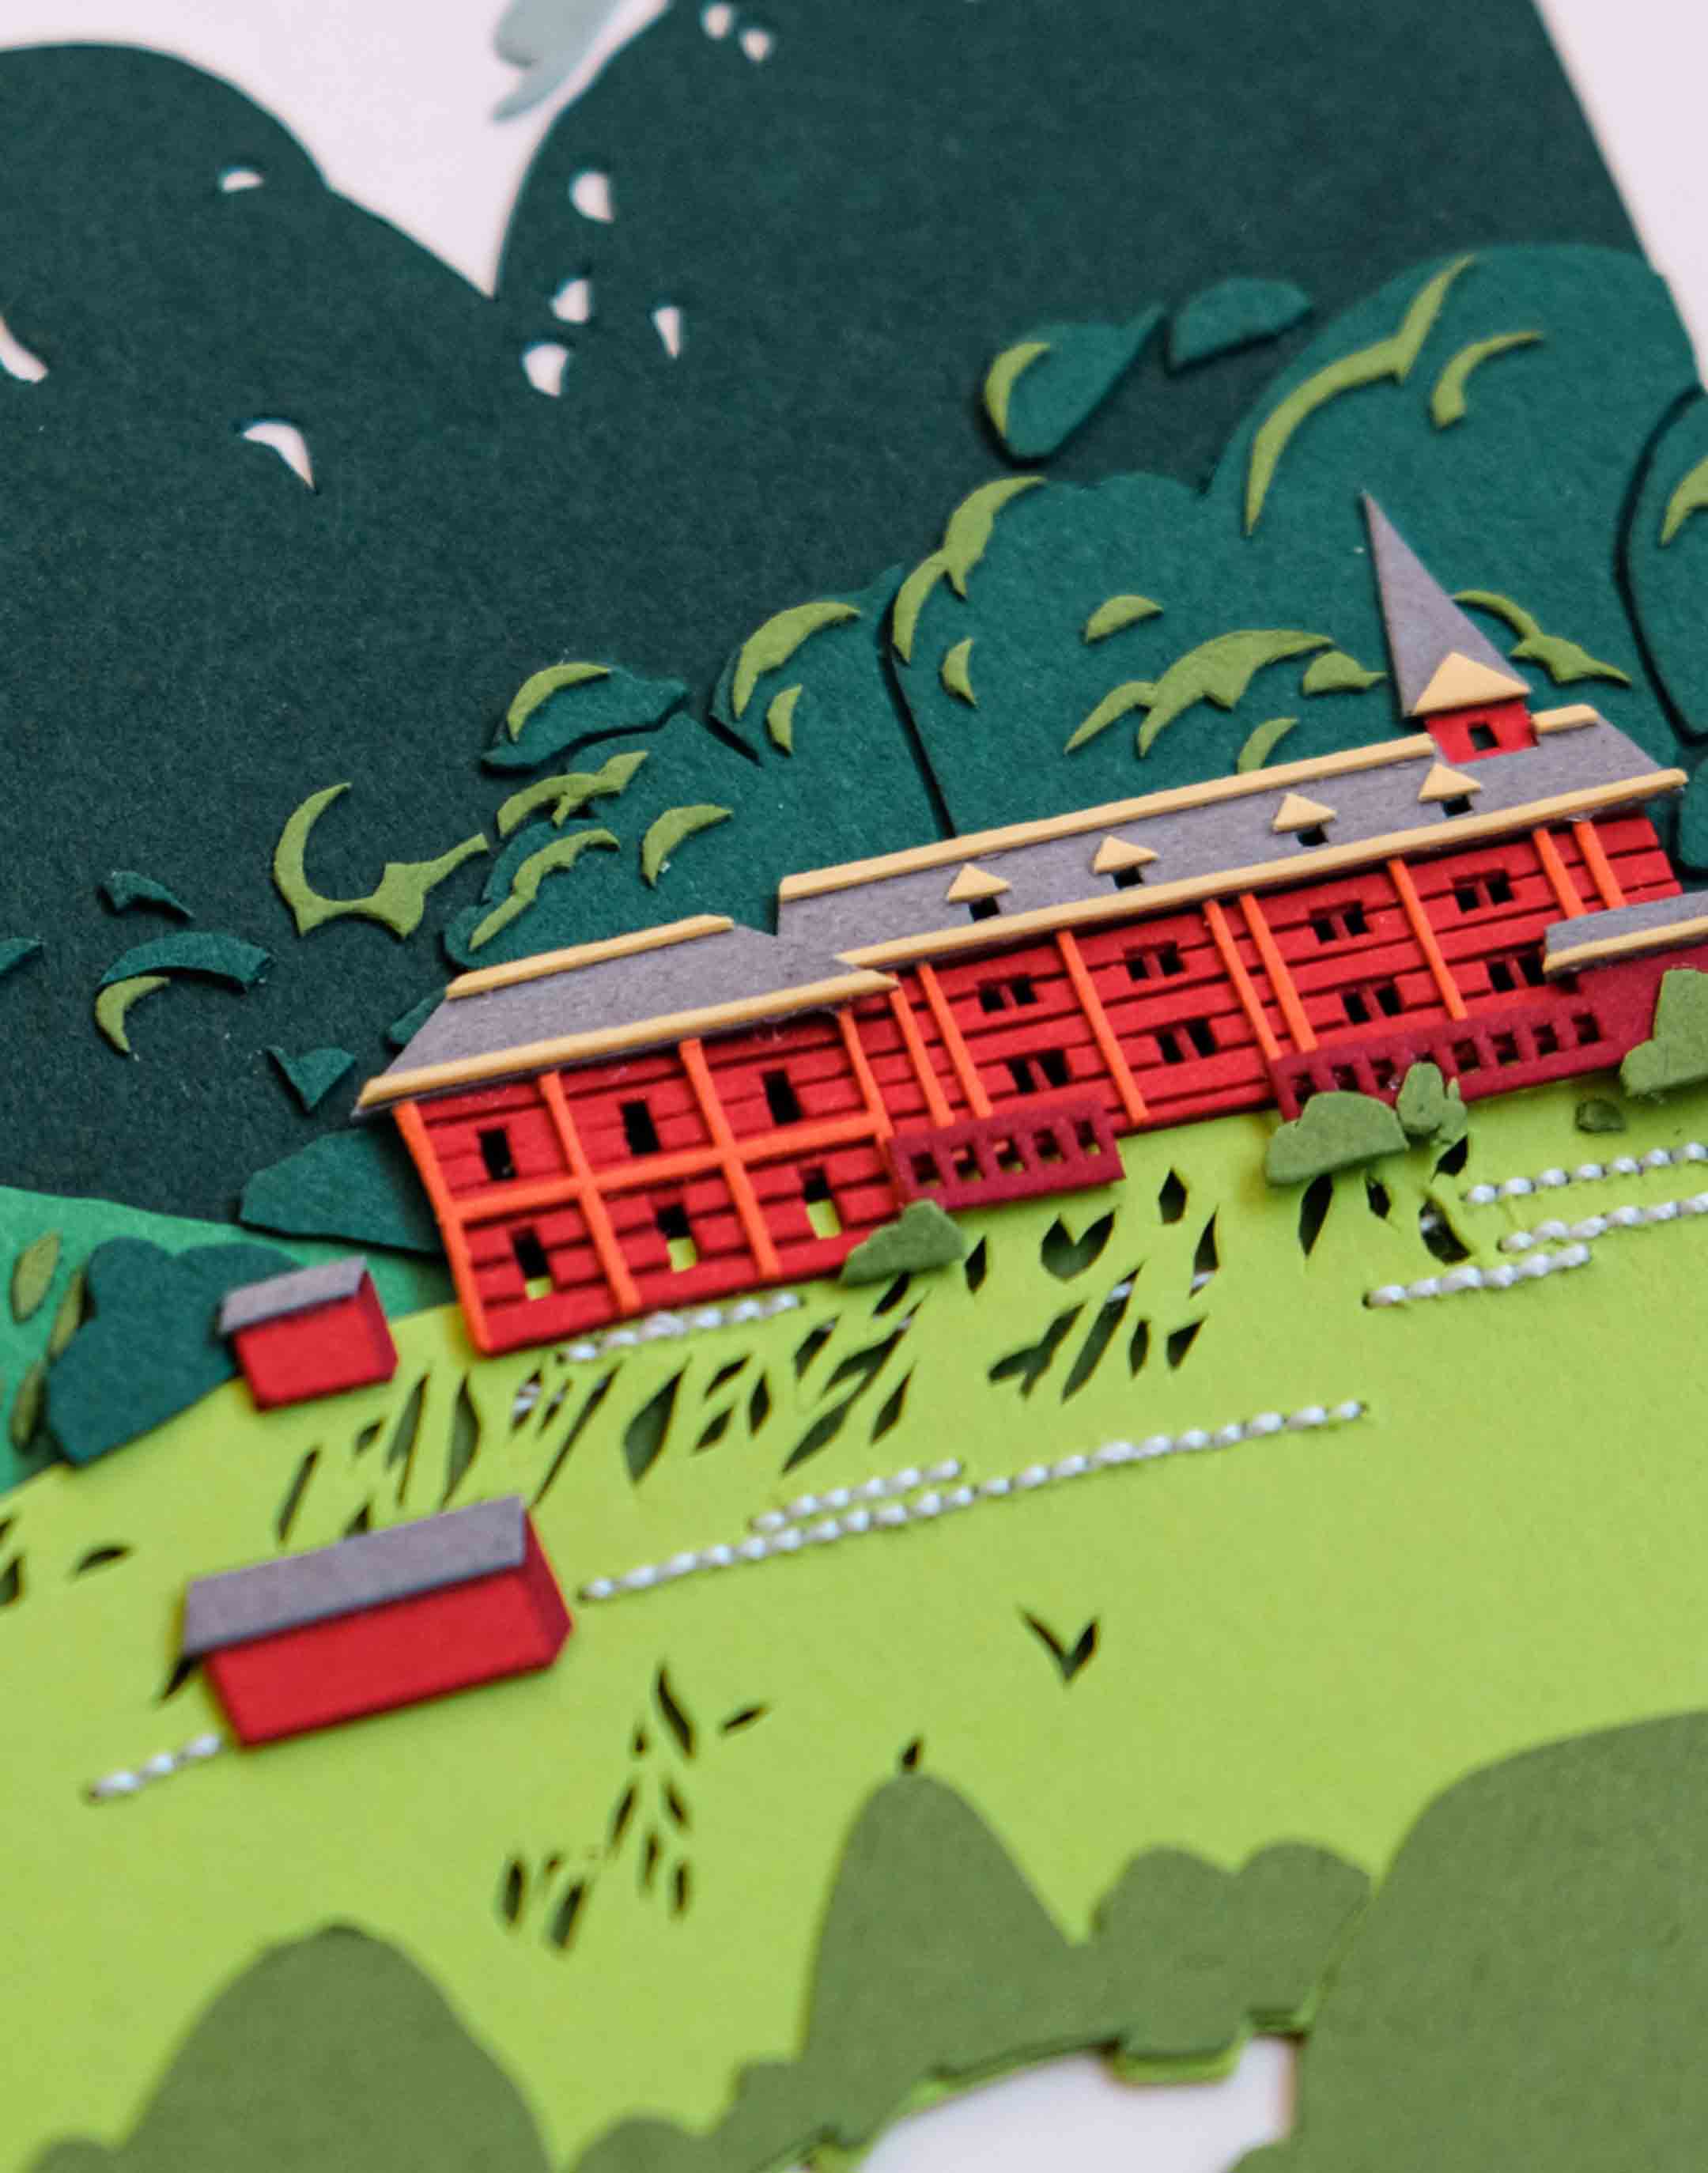 An angled close-up of the artwork reveals the layers of paper that make up the red paper schoolhouse, as well as some white thread details.